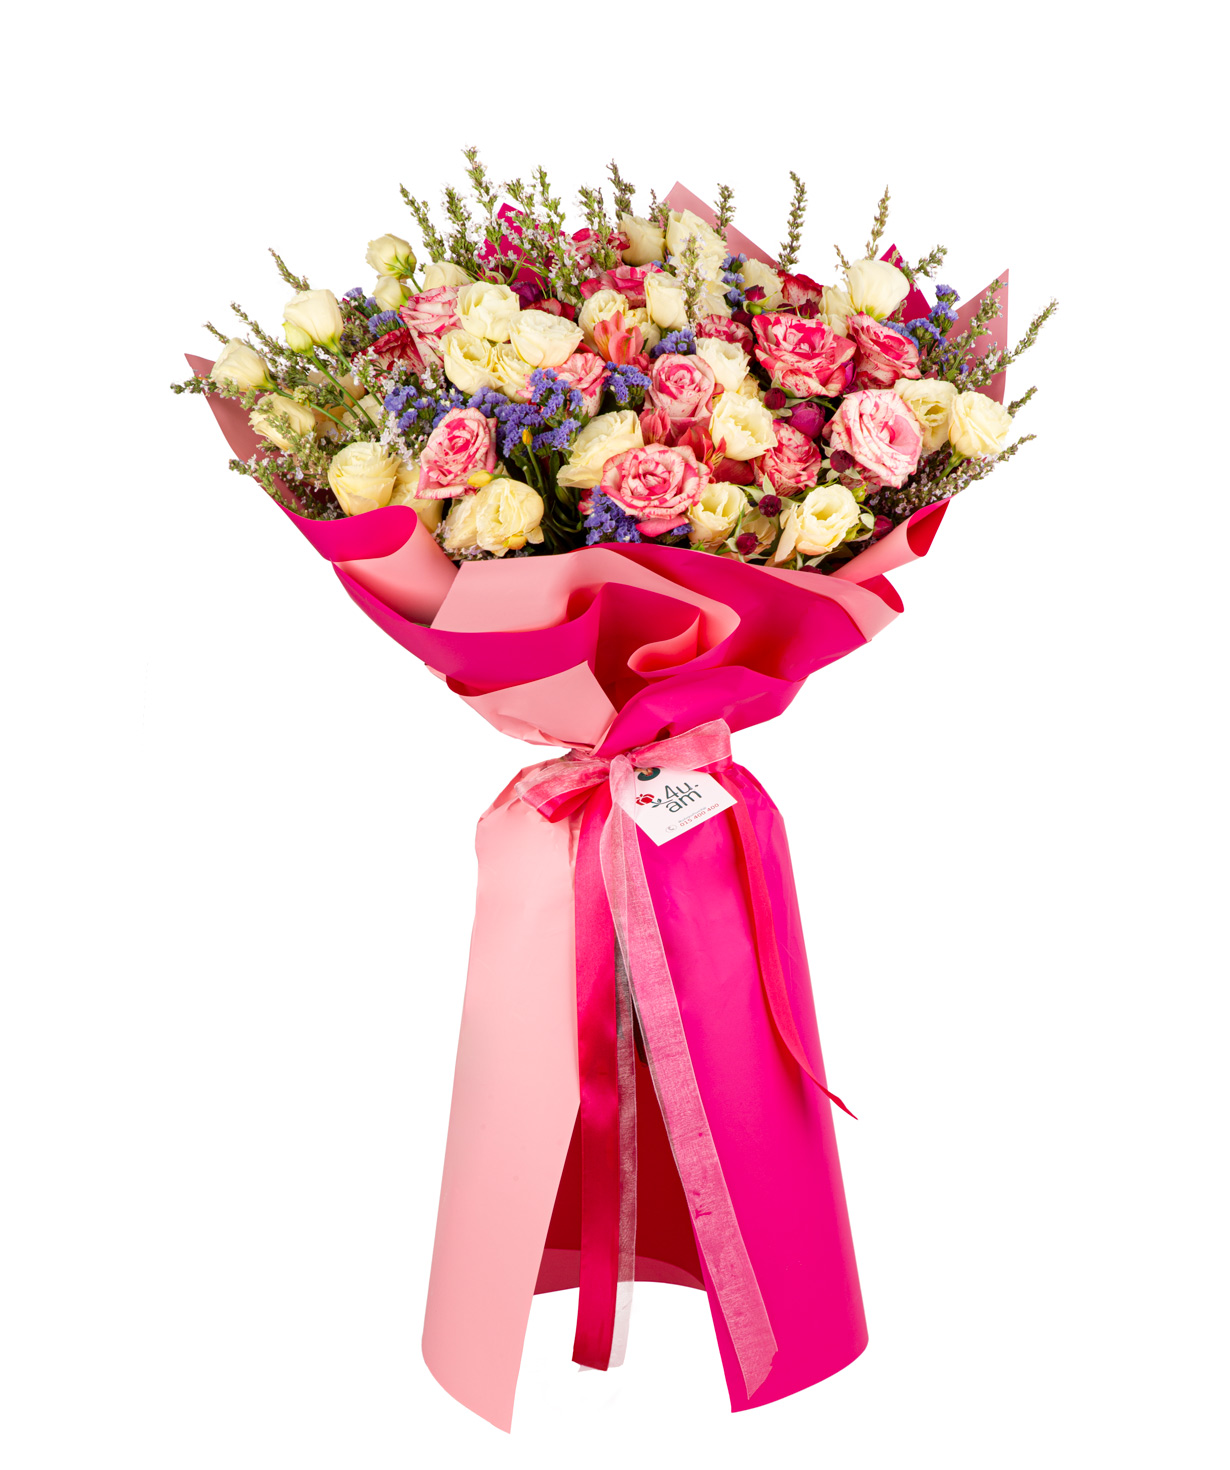 Bouquet `Alondra` with roses, bush roses, lisianthus and limoniums